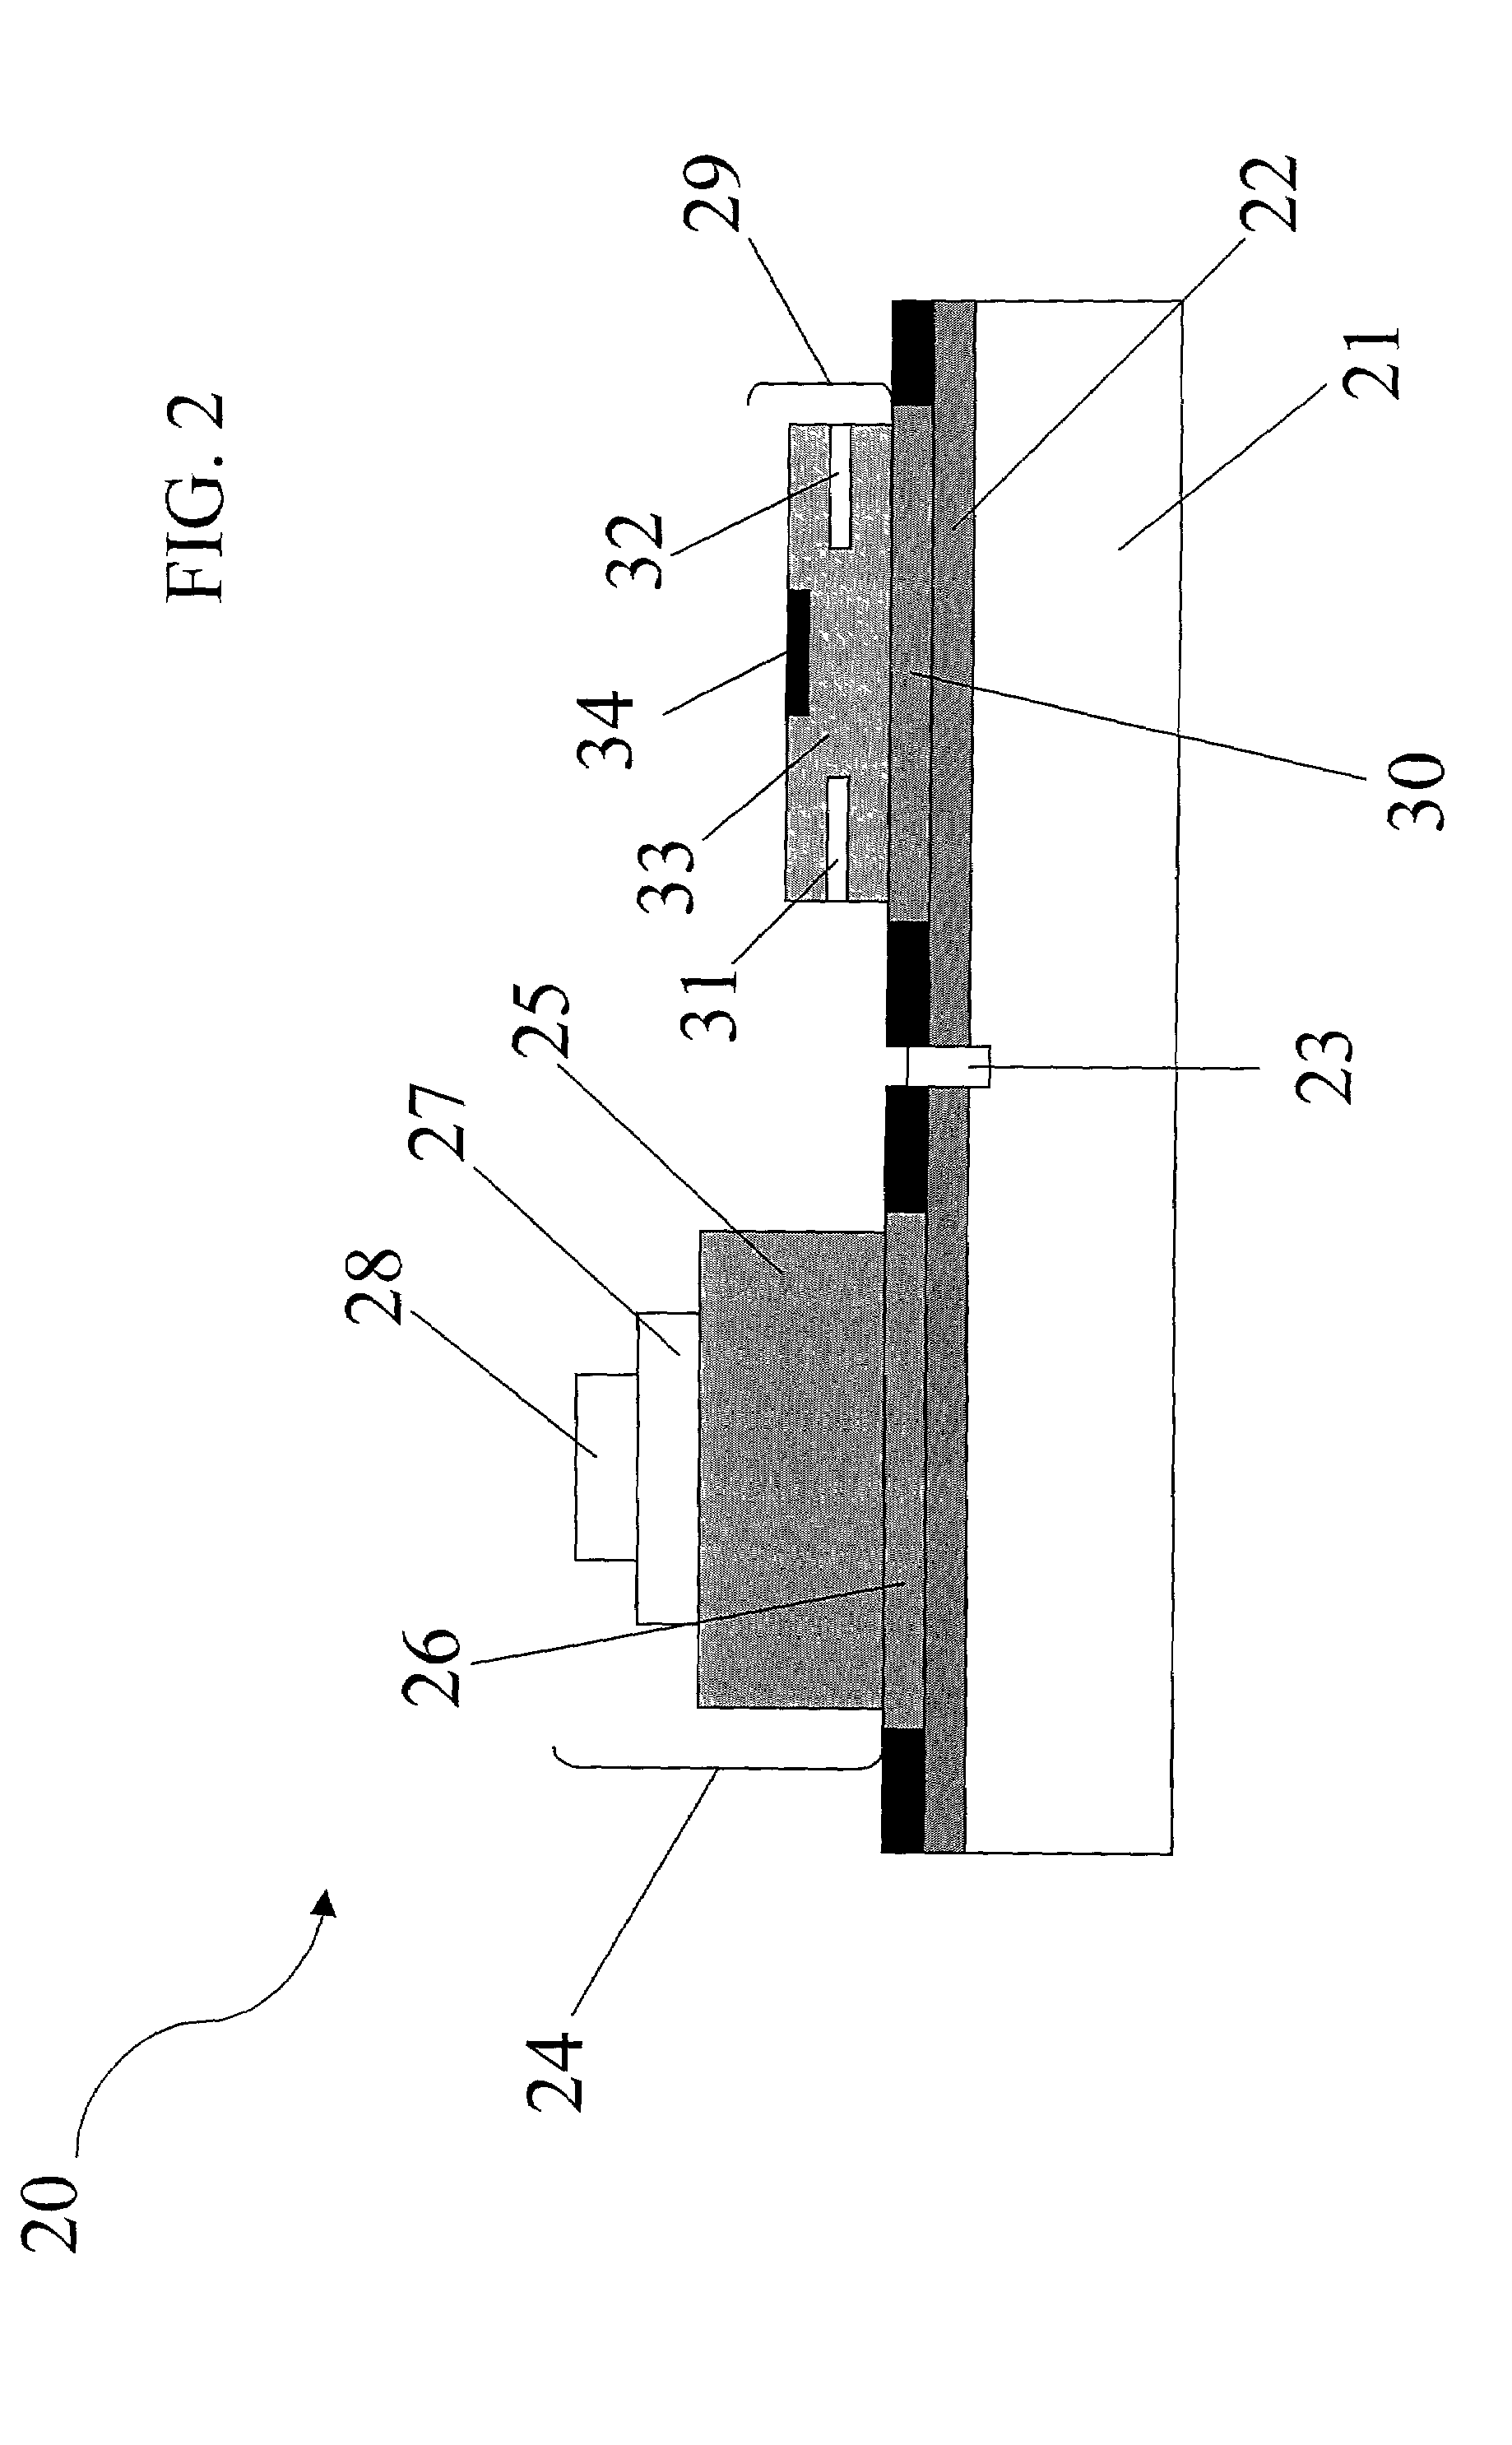 Silicon carbide and related wide-bandgap transistors on semi-insulating epitaxy for high-speed, high-power applications